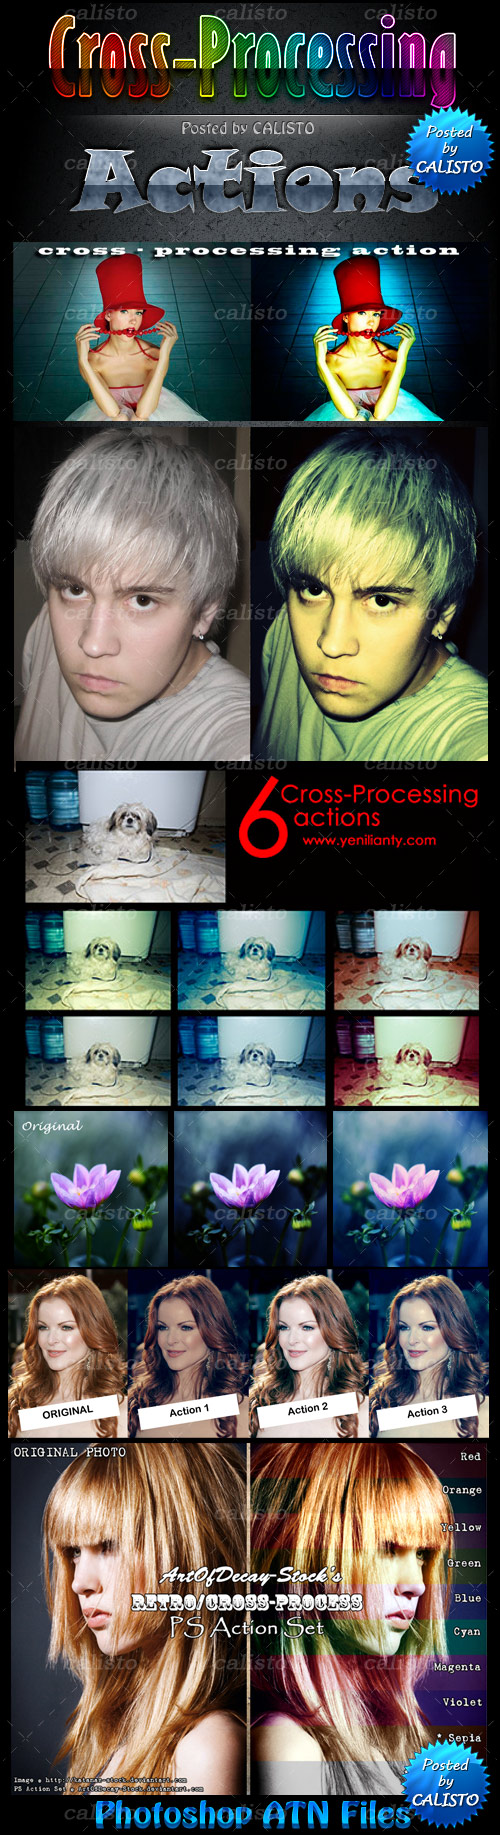 Cross-Processing Actions